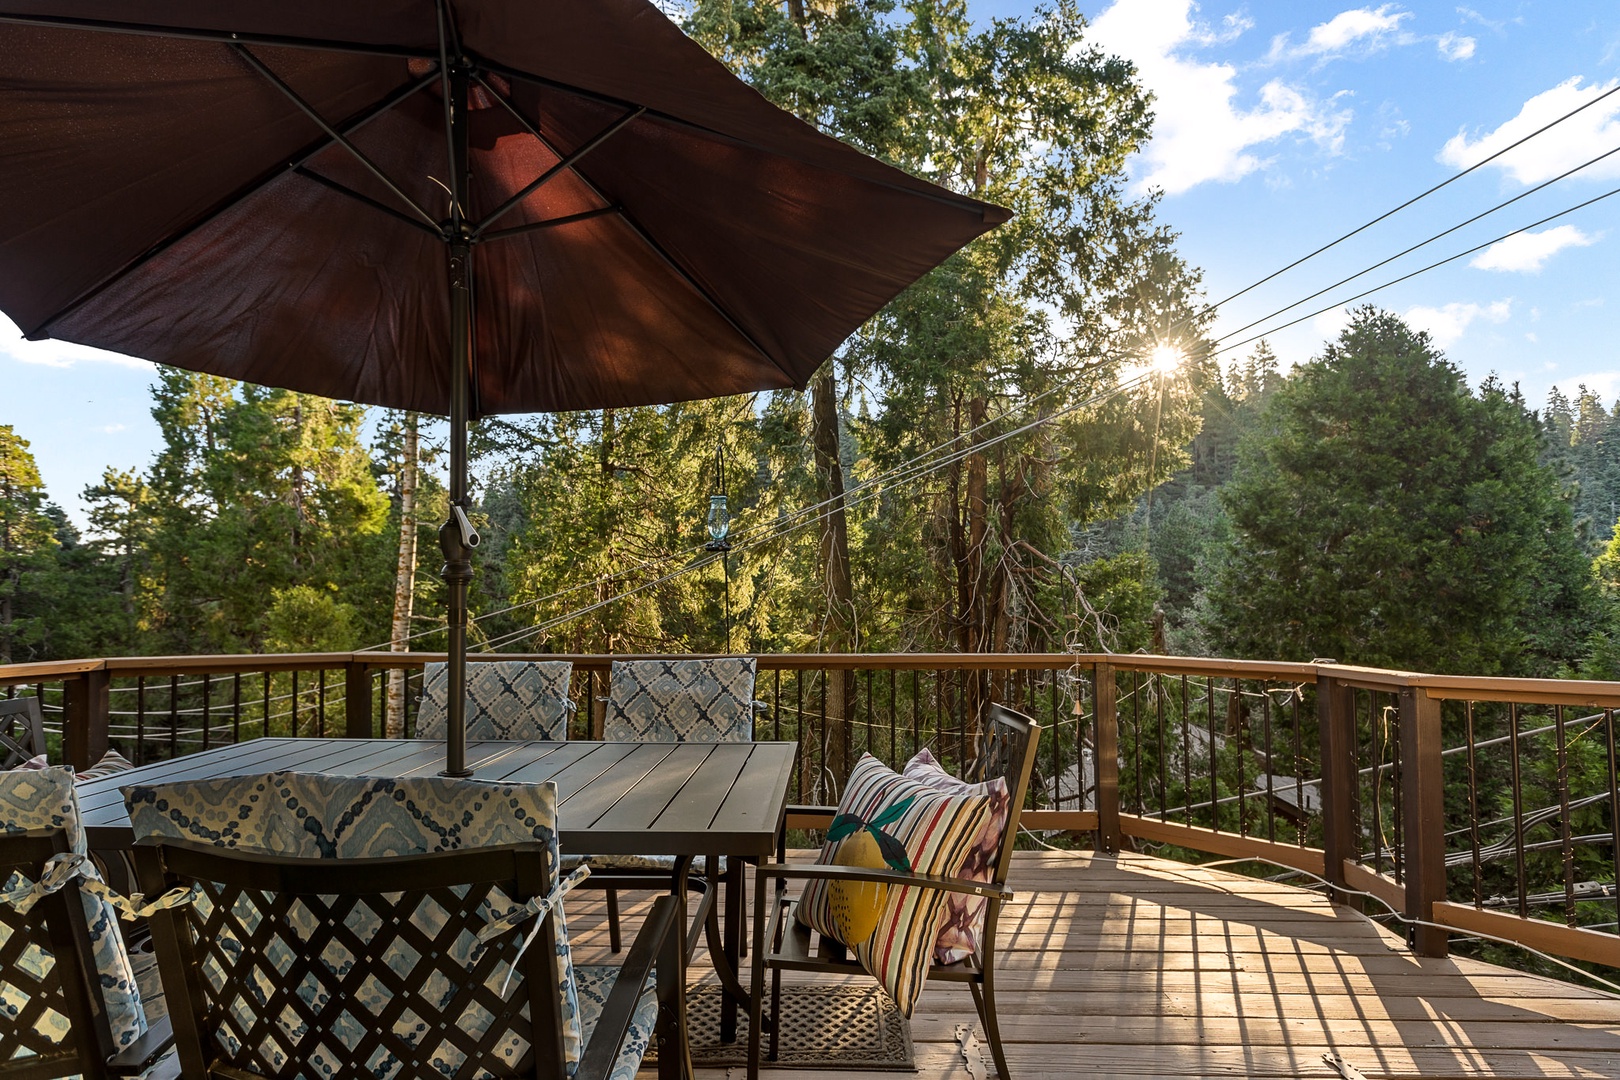 Dine or lounge the day away on the back deck